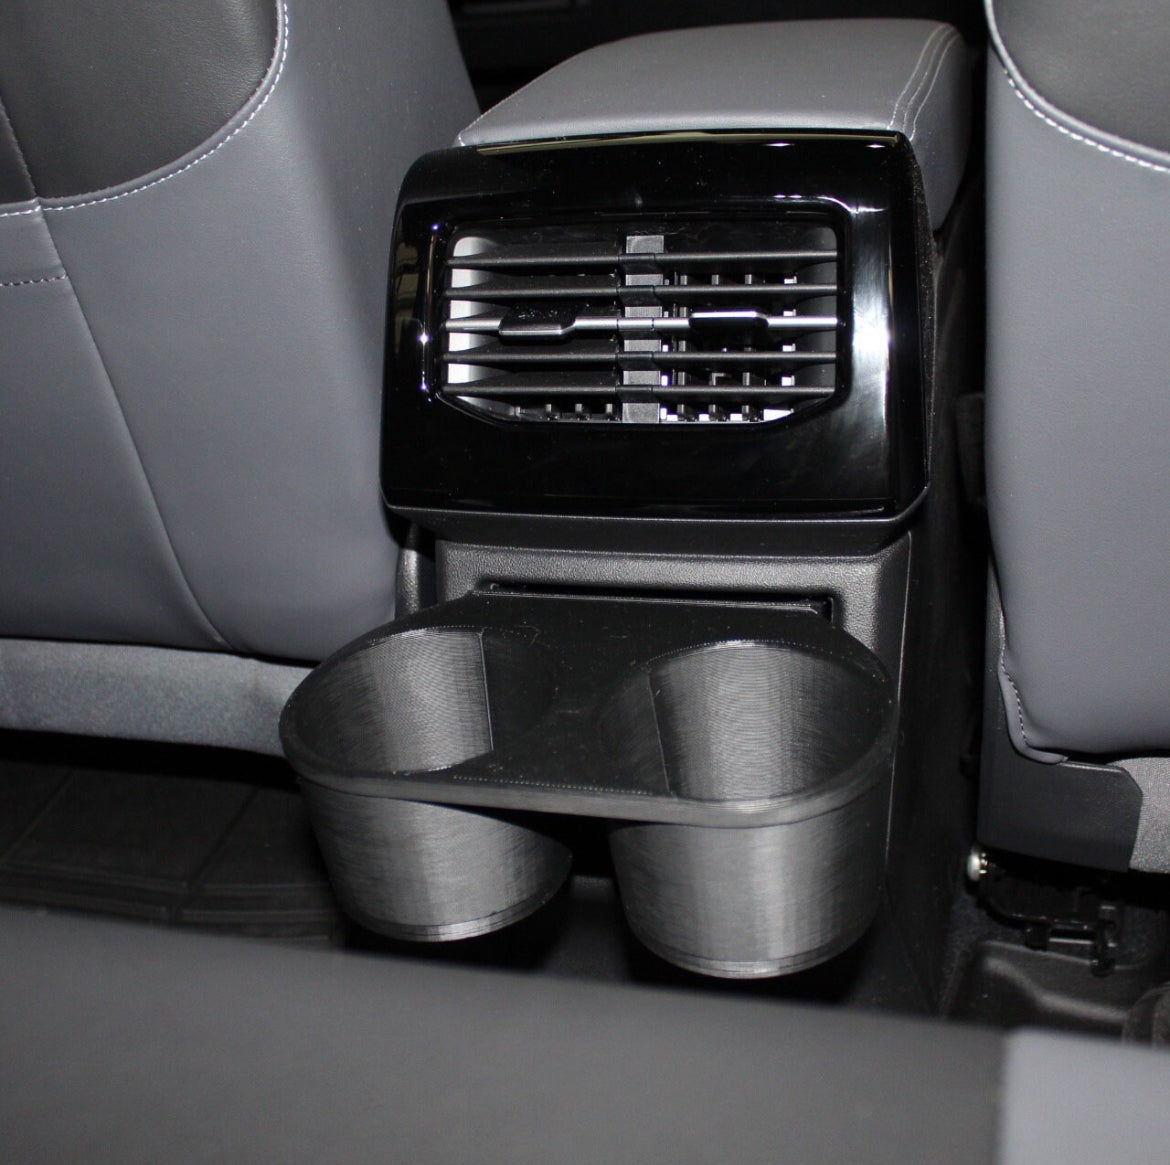 Rear two-cup cup holder for 2023 Volkswagen VW ID.4. This is must have accessory for base version of the ID.4 that does not have a cupholder in the rear seat. Must have Id.4 mod.